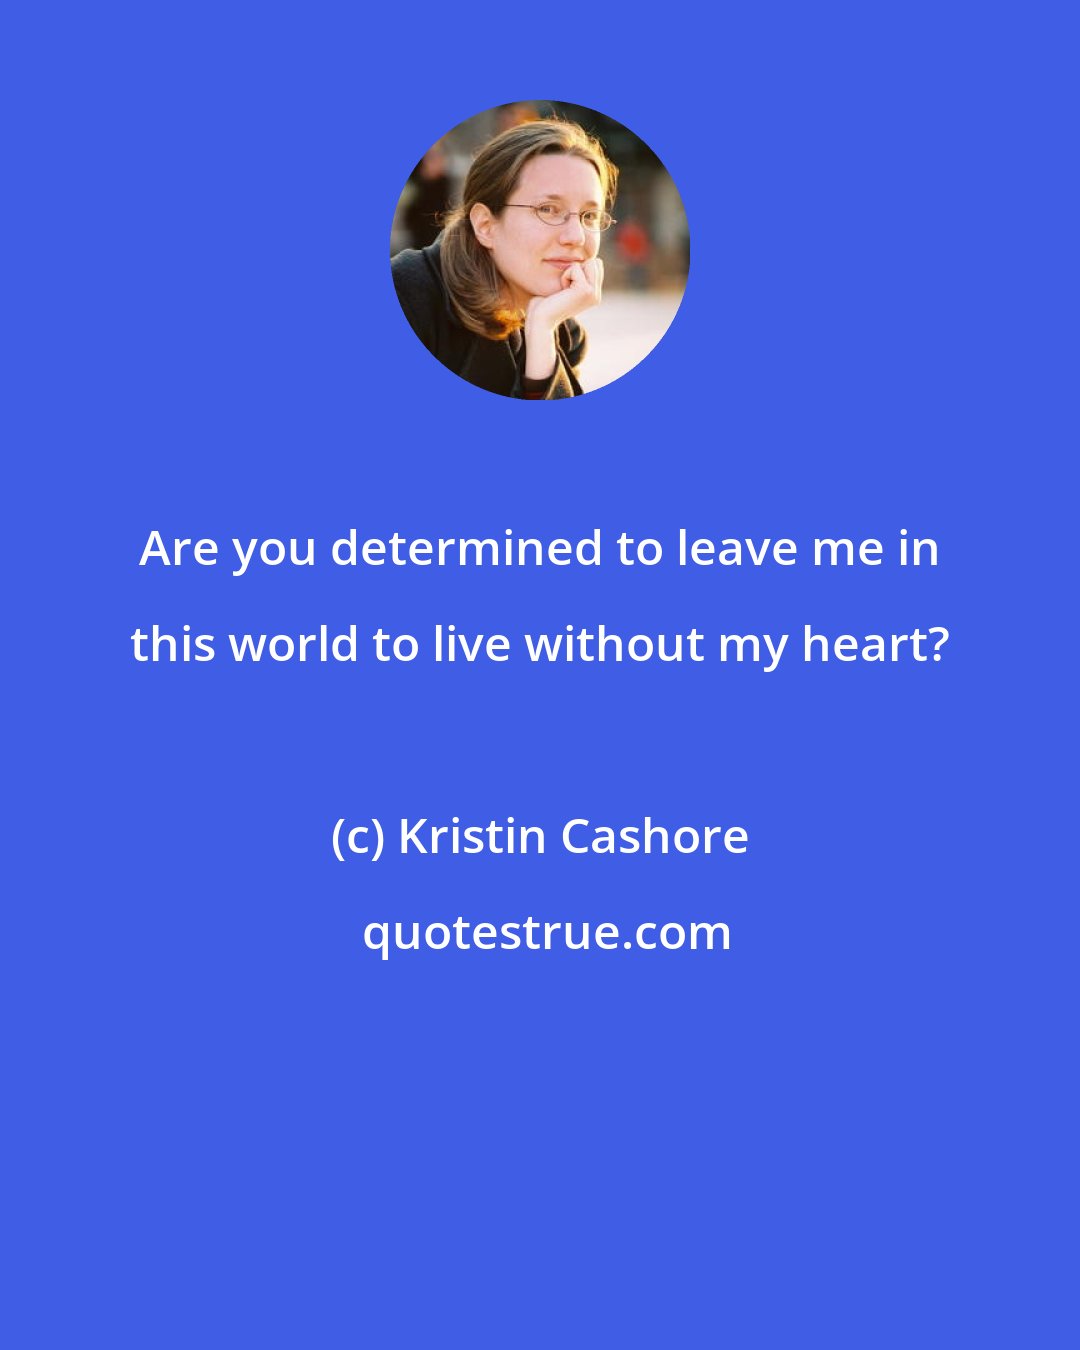 Kristin Cashore: Are you determined to leave me in this world to live without my heart?